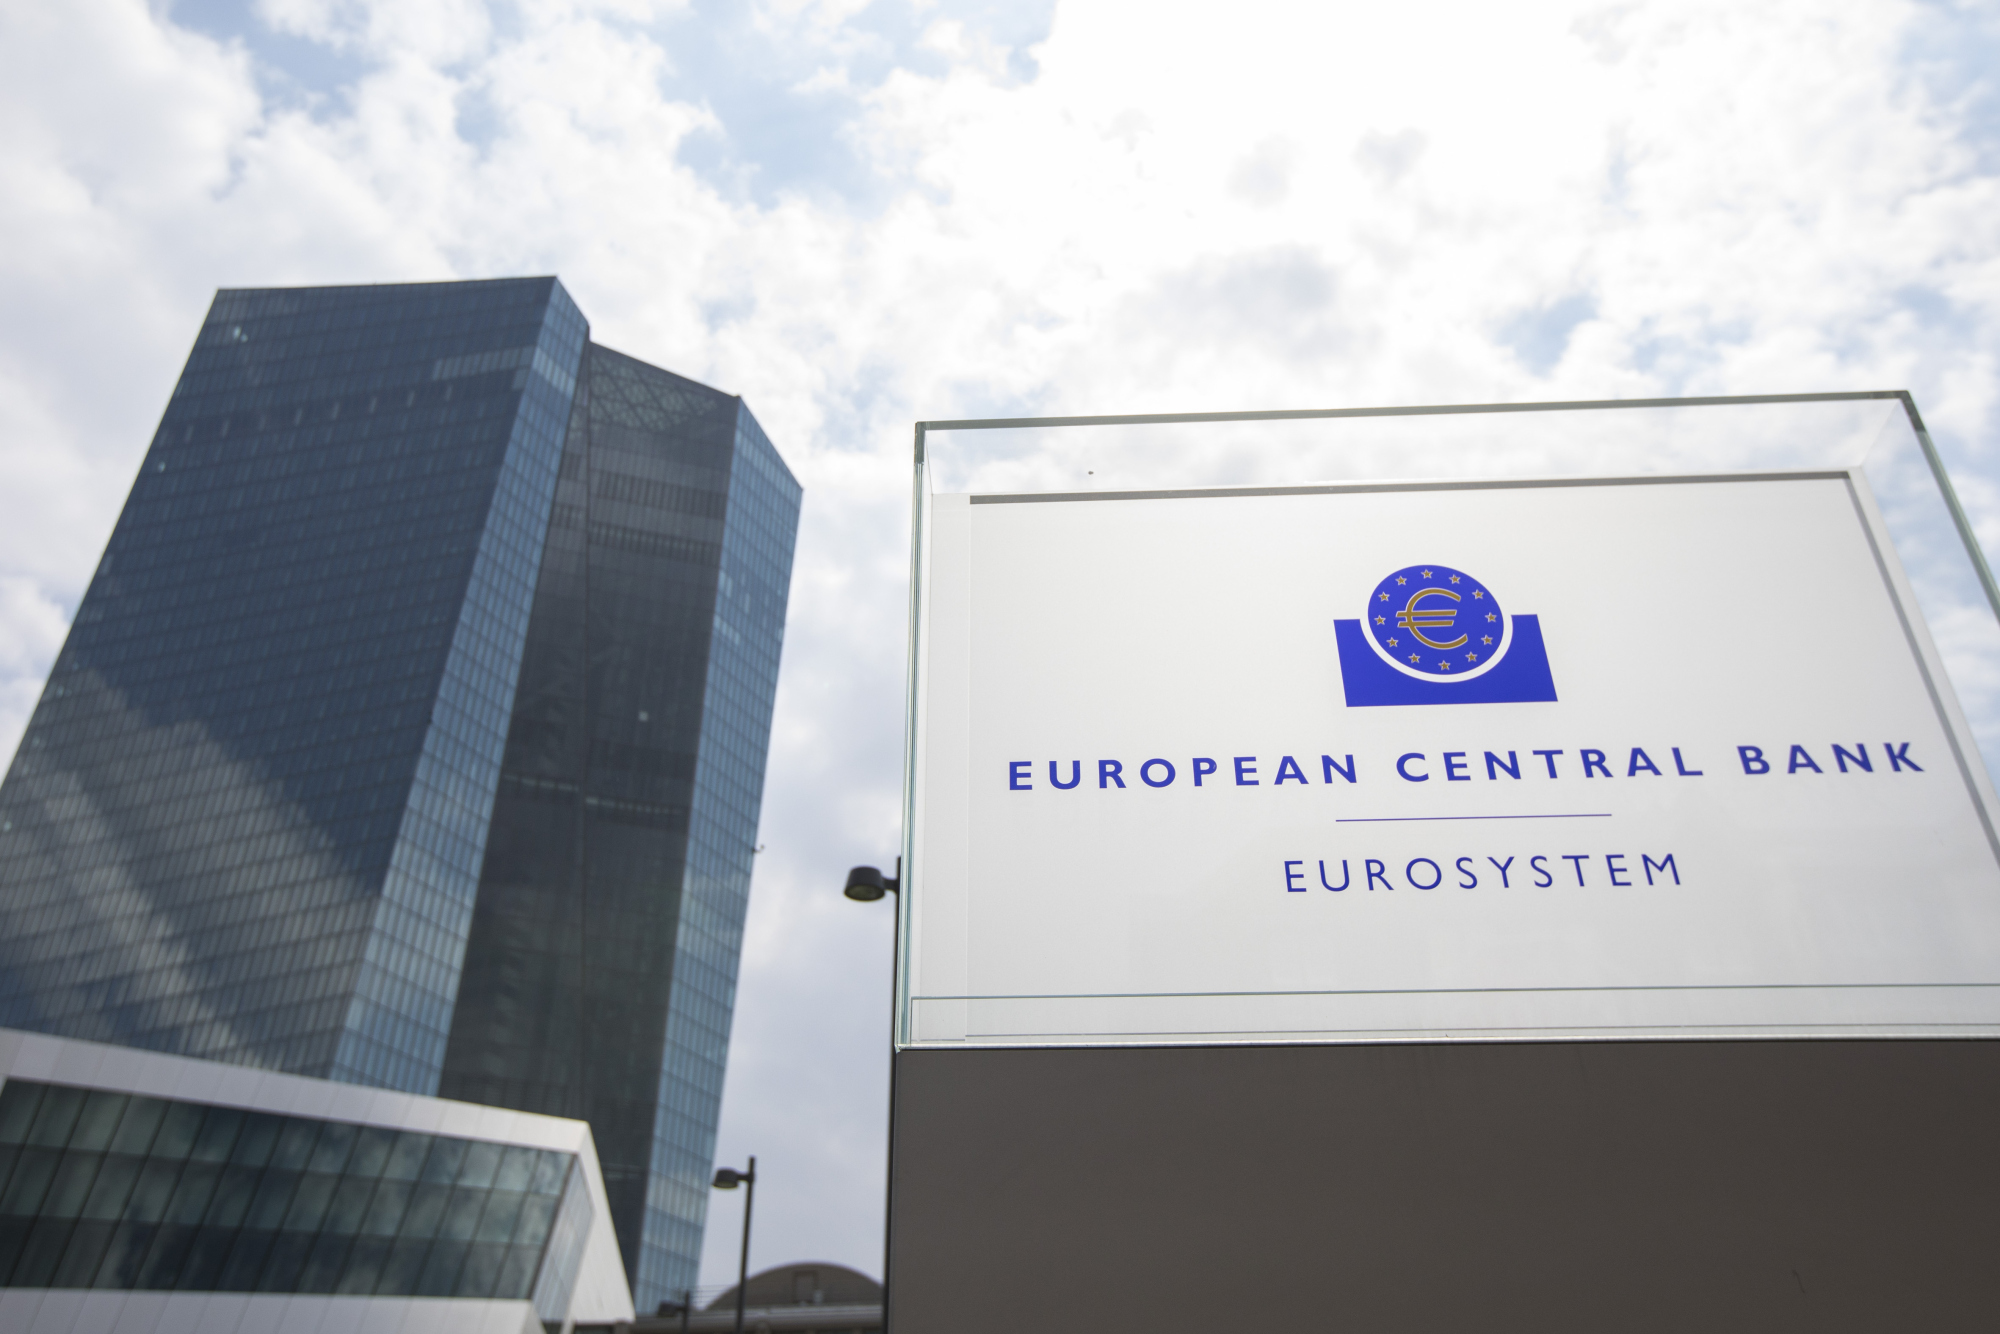 A euro currency symbol sits on a eurosystem sign outside the the European Central Bank (ECB) headquarters in Frankfurt, Germany, on Thursday, April 27, 2017. The ECB kept interest rates unchanged at record lows and maintained its quantitative-easing program as officials monitor the economic recovery and the risk of political turbulence in the region.